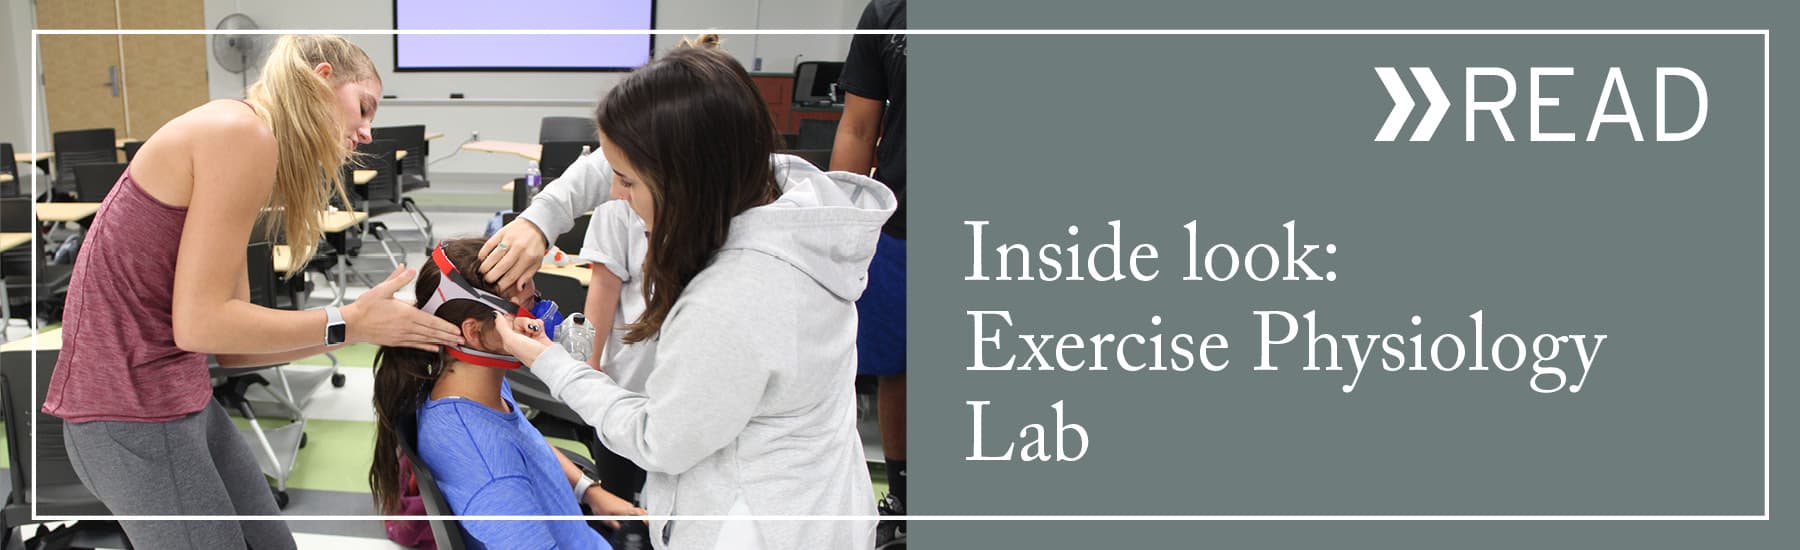 READ: Inside look at the Exercise Physiology Lab